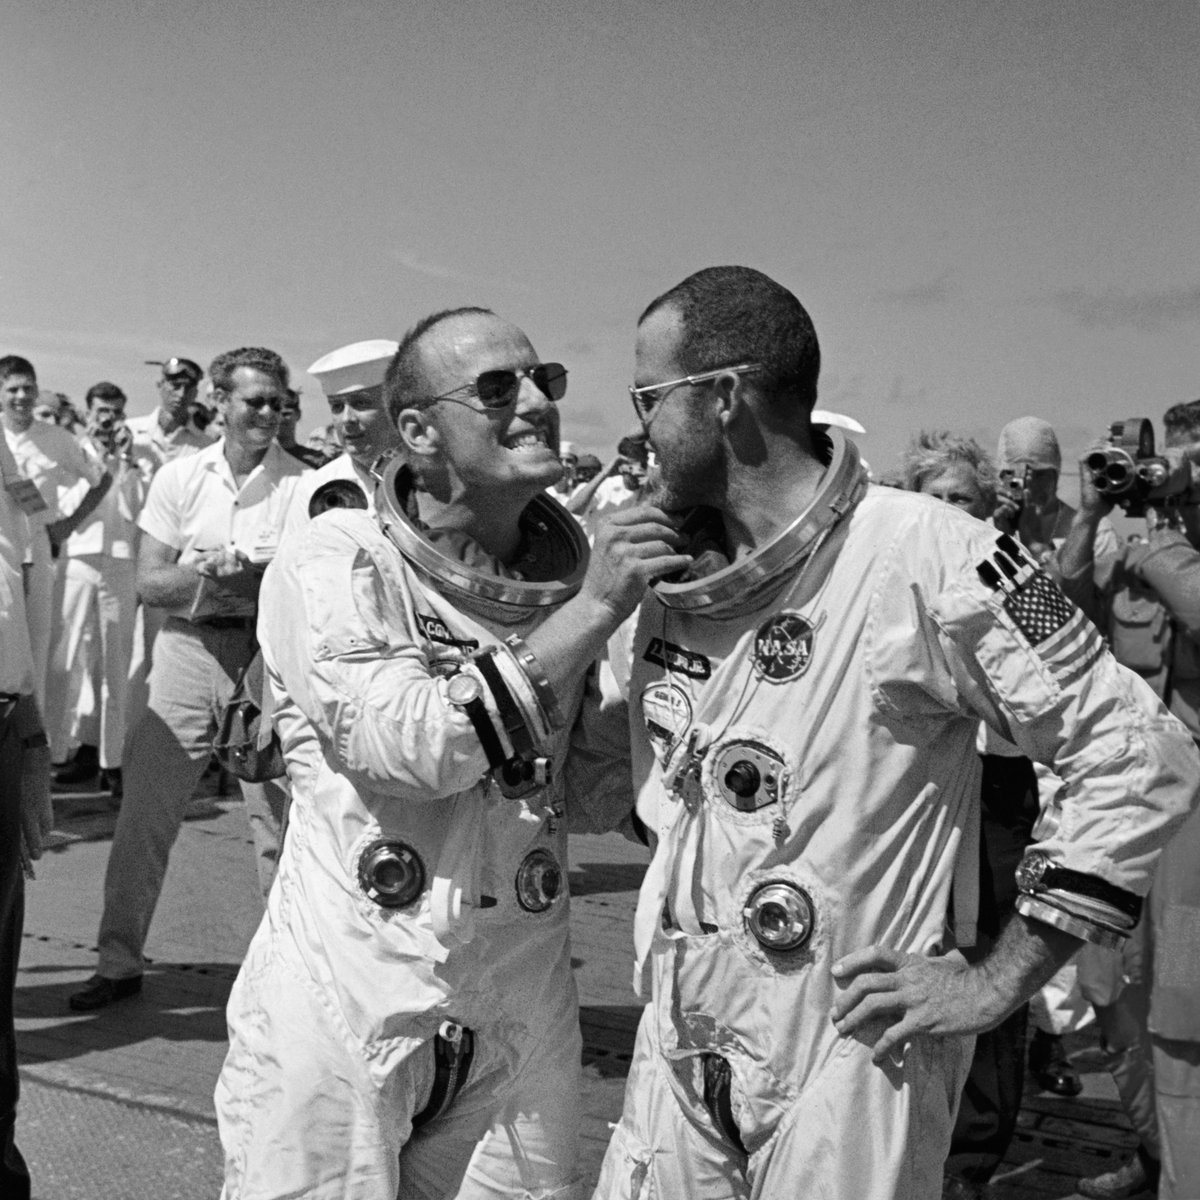 #ThrowBack ⏪: Charles 'Pete' Conrad Jr, founder of what is now SSC Space US, was the third human to set foot on the Moon’s surface. In this photo he is seen joking around with fellow astronaut L. Gordon Cooper before the Gemini-5 spaceflight in 1965 🧑‍🚀